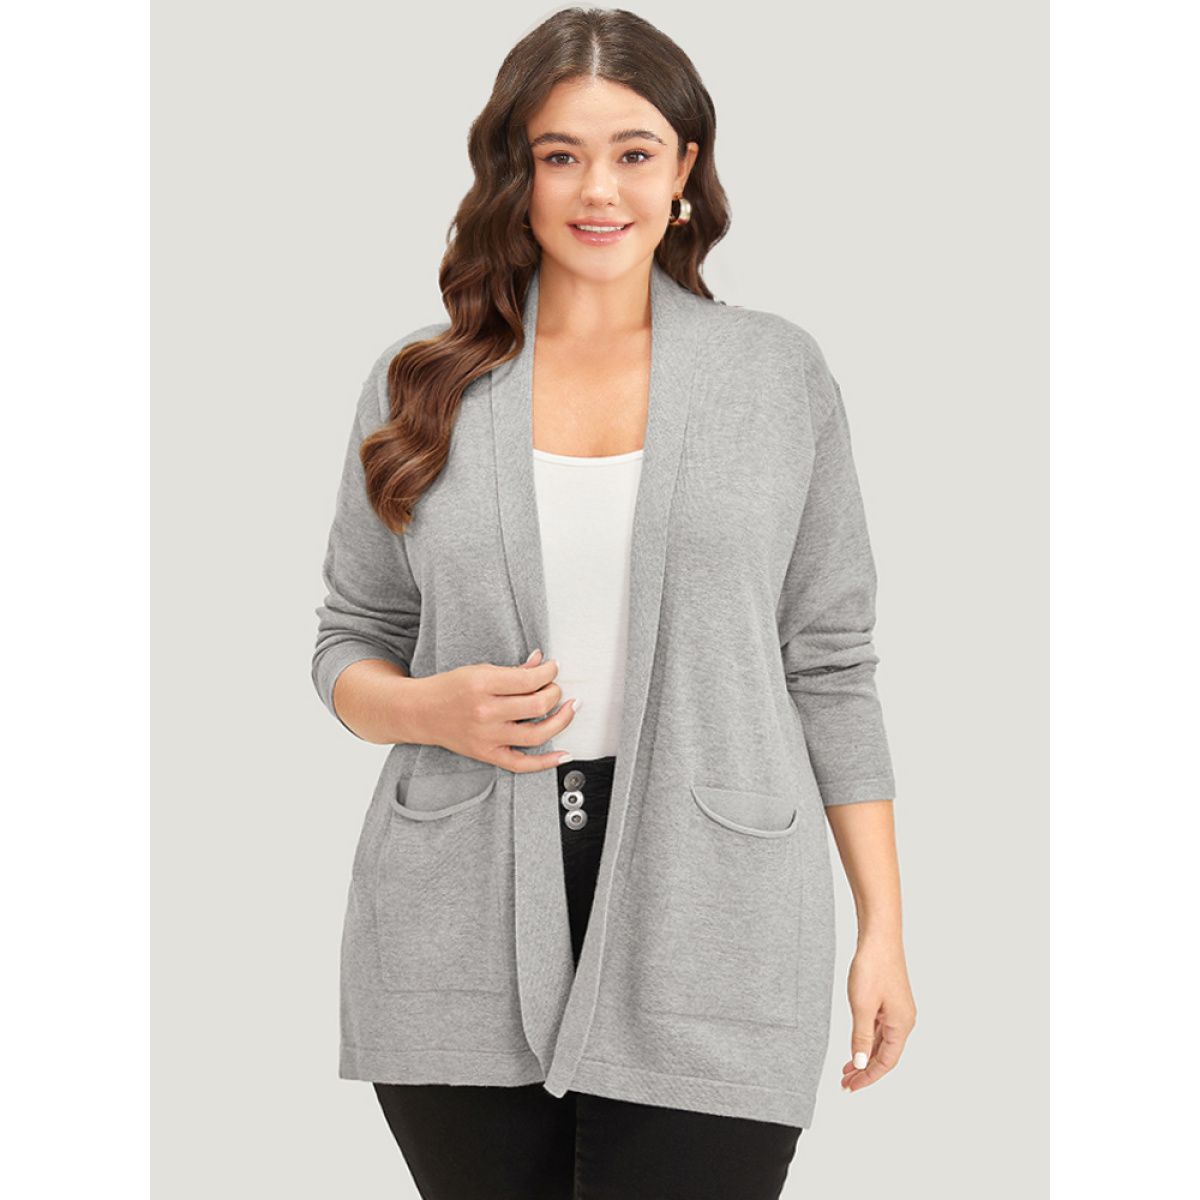 

Plus Size Supersoft Essentials Plain Lapel Collar Patched Pocket Cardigan DarkGray Women Basics Loose Long Sleeve Everyday Cardigans BloomChic